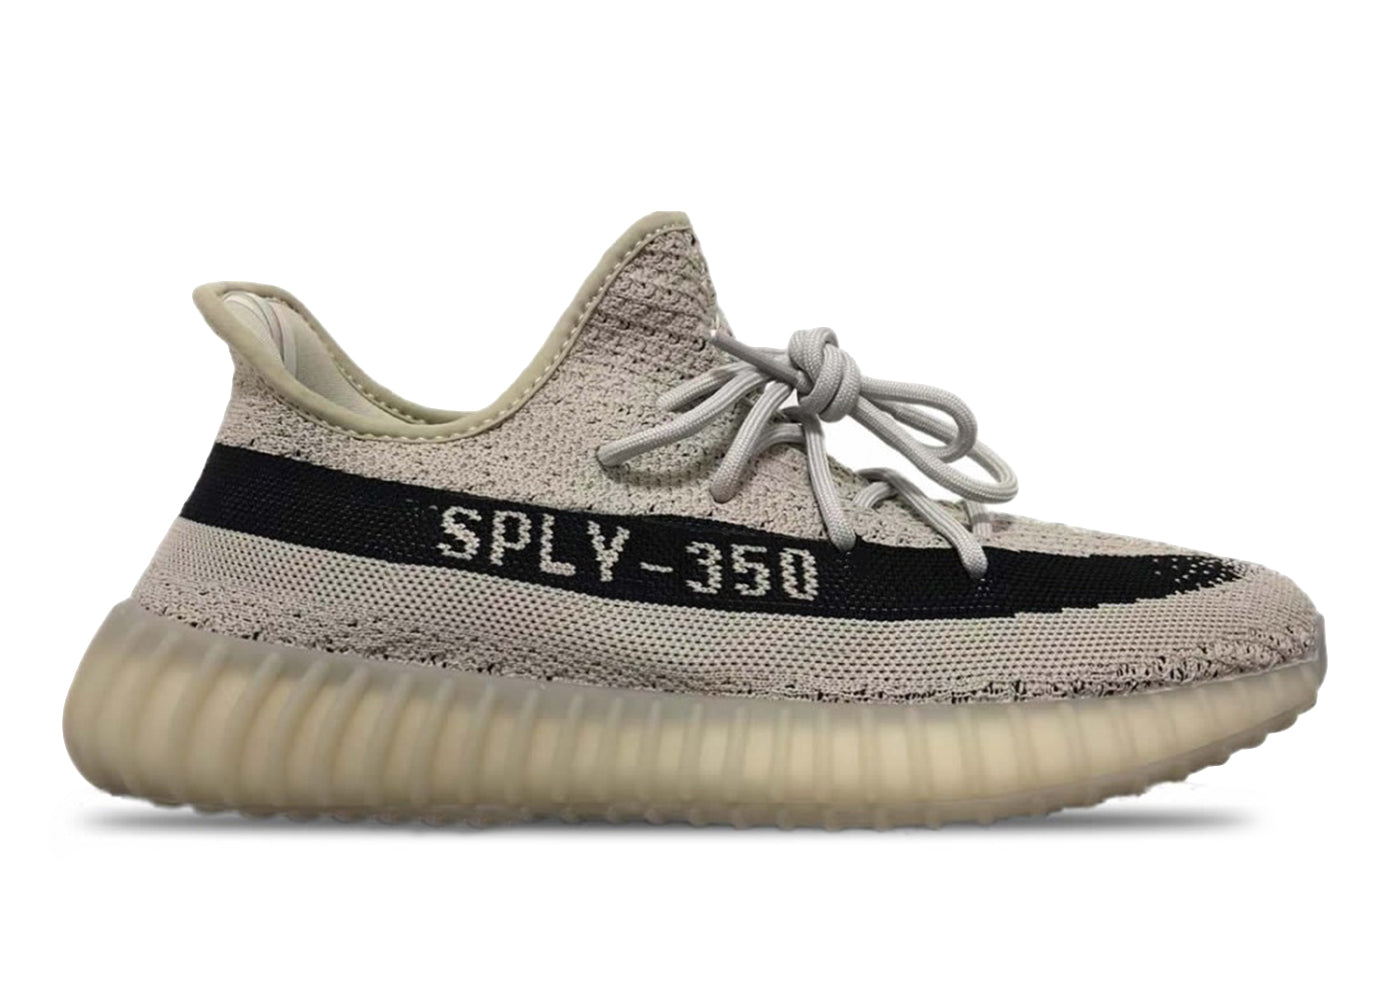 Yeezy Boost 350 V2 Low Blue Tint for Sale, Authenticity Guaranteed